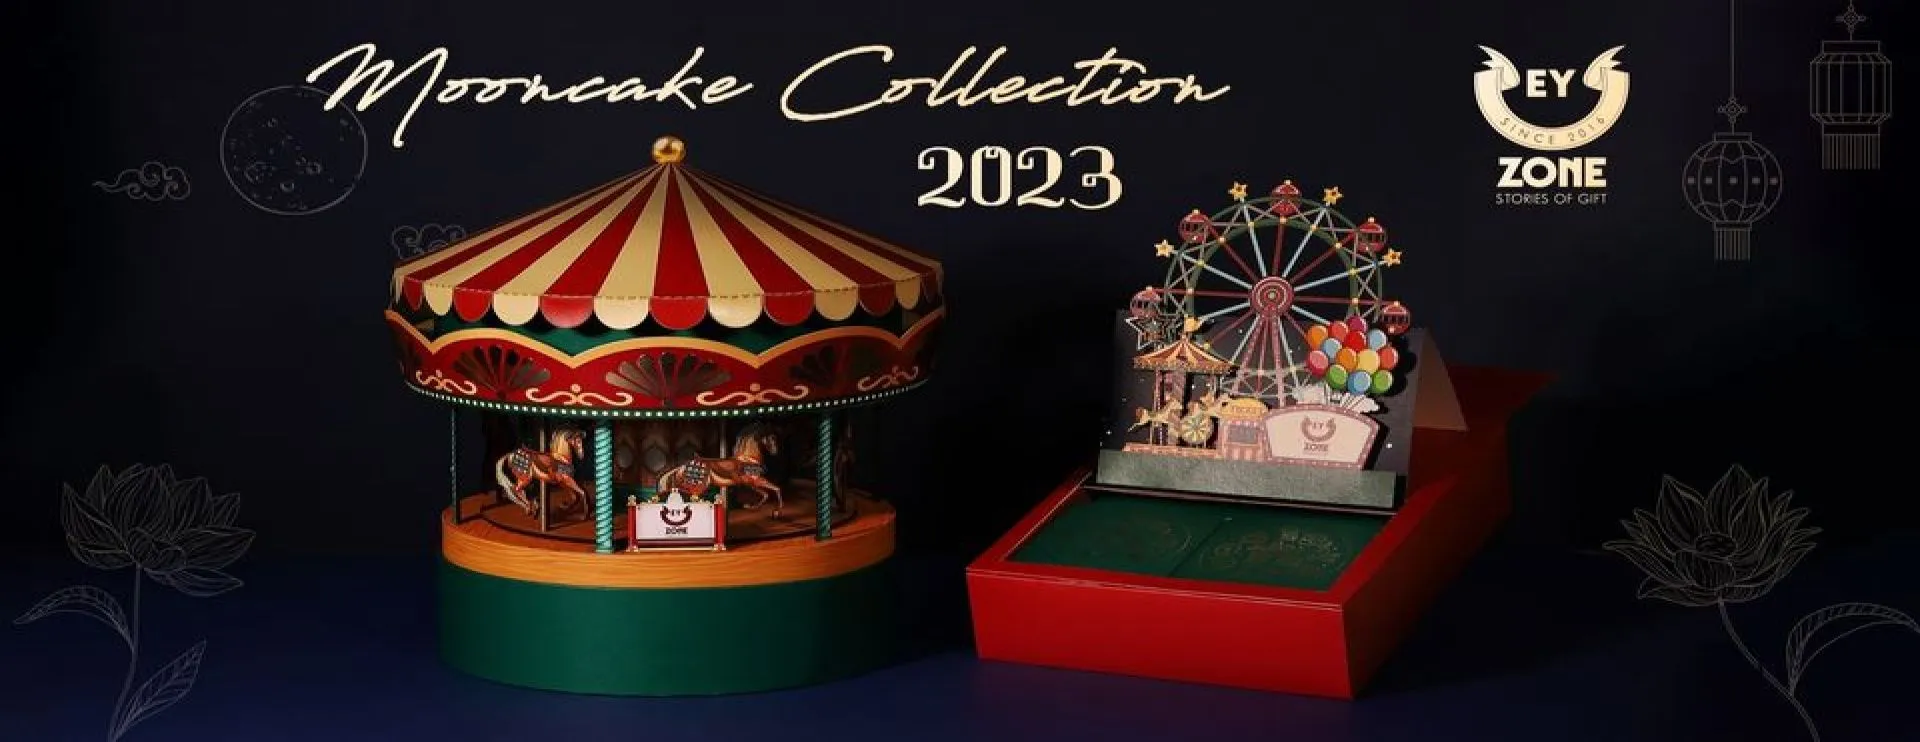 Moon Cake Collection 2023